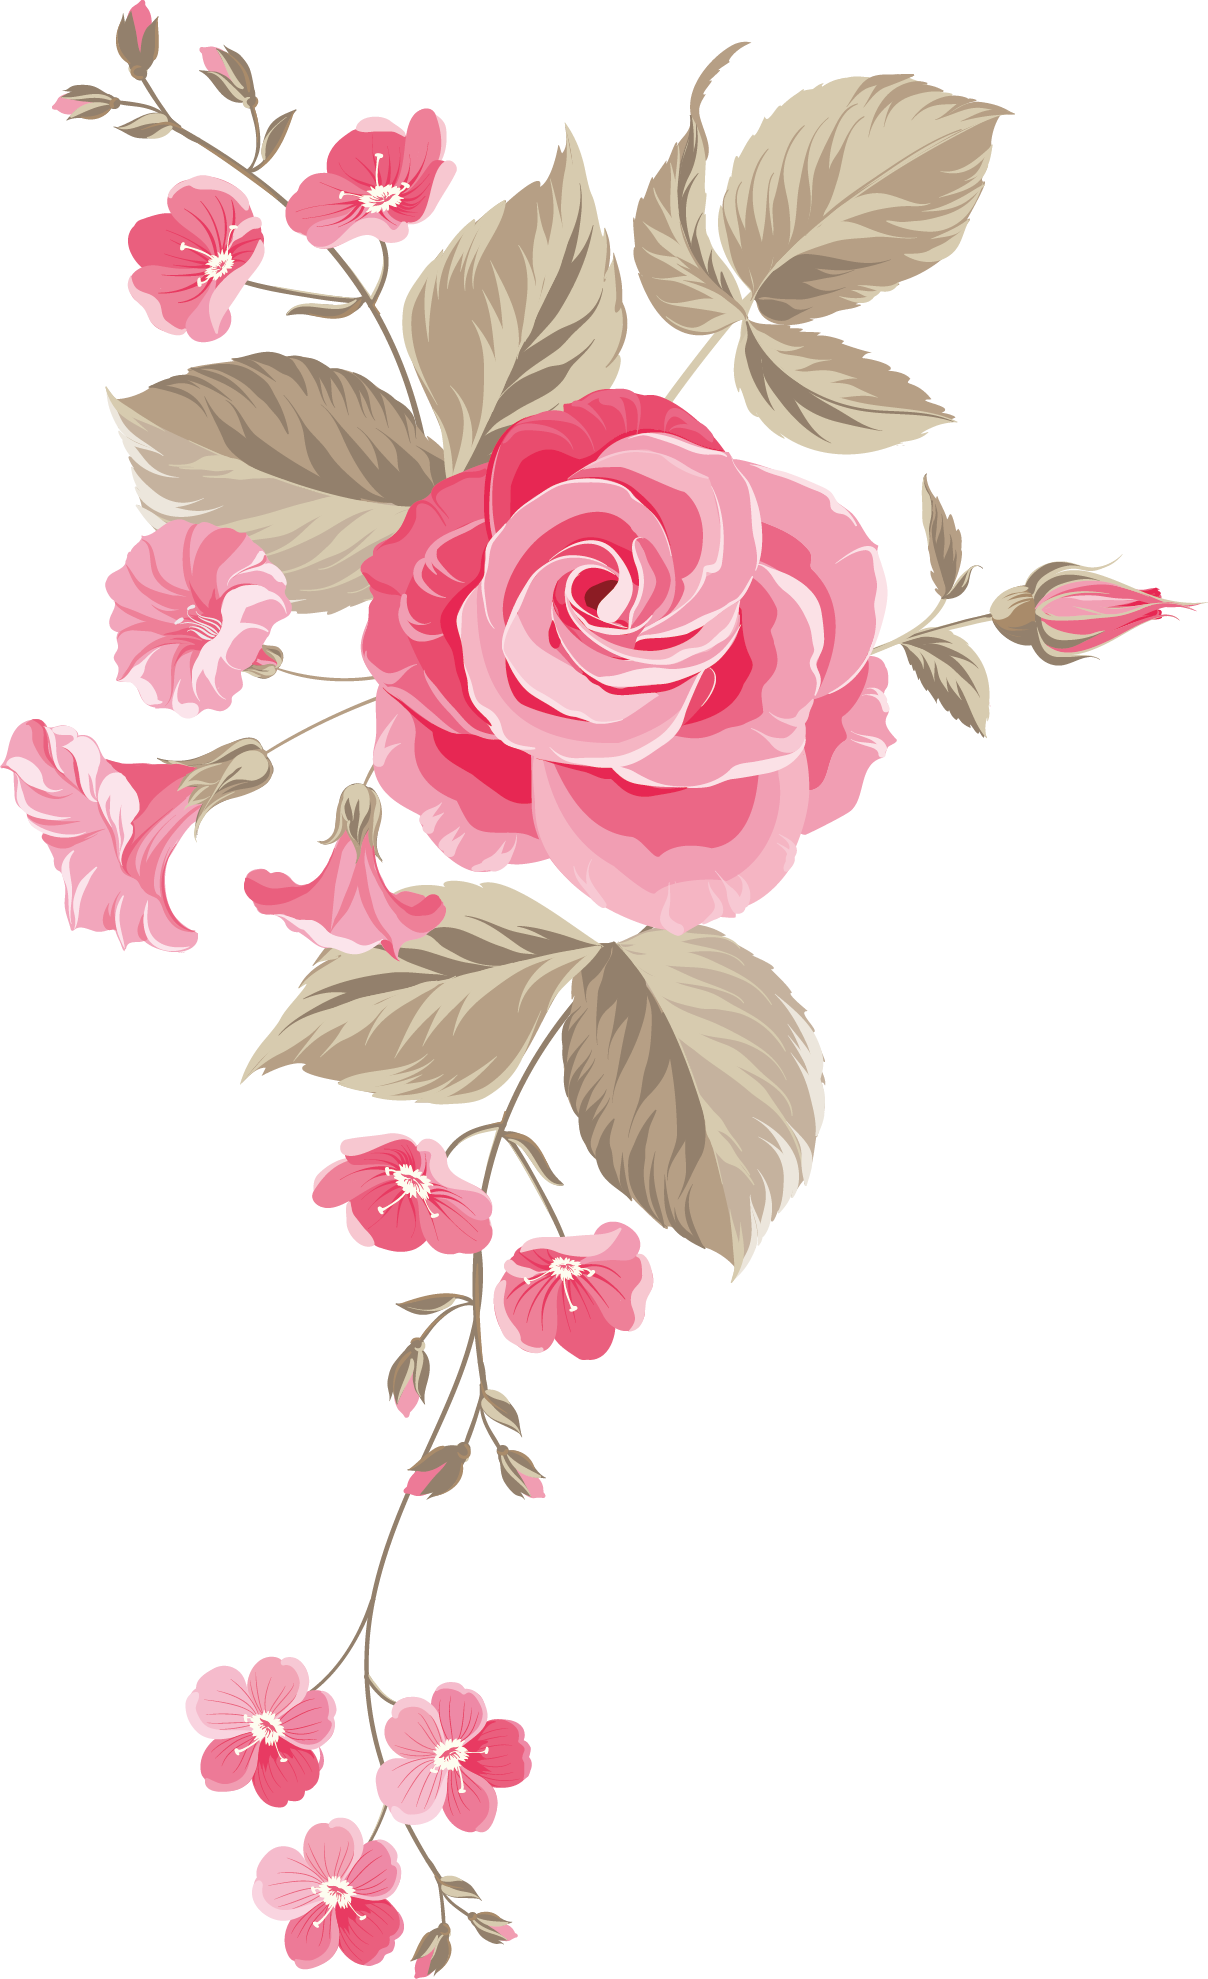 Garden Roses Centifolia Roses Floral Design Cut Flowers Flower Bouquet Hand Painted Flowers Background Png Download 1208 1979 Free Transparent Wedding Invitation Png Download Clip Art Library,Hm Designer Collaborations 2020